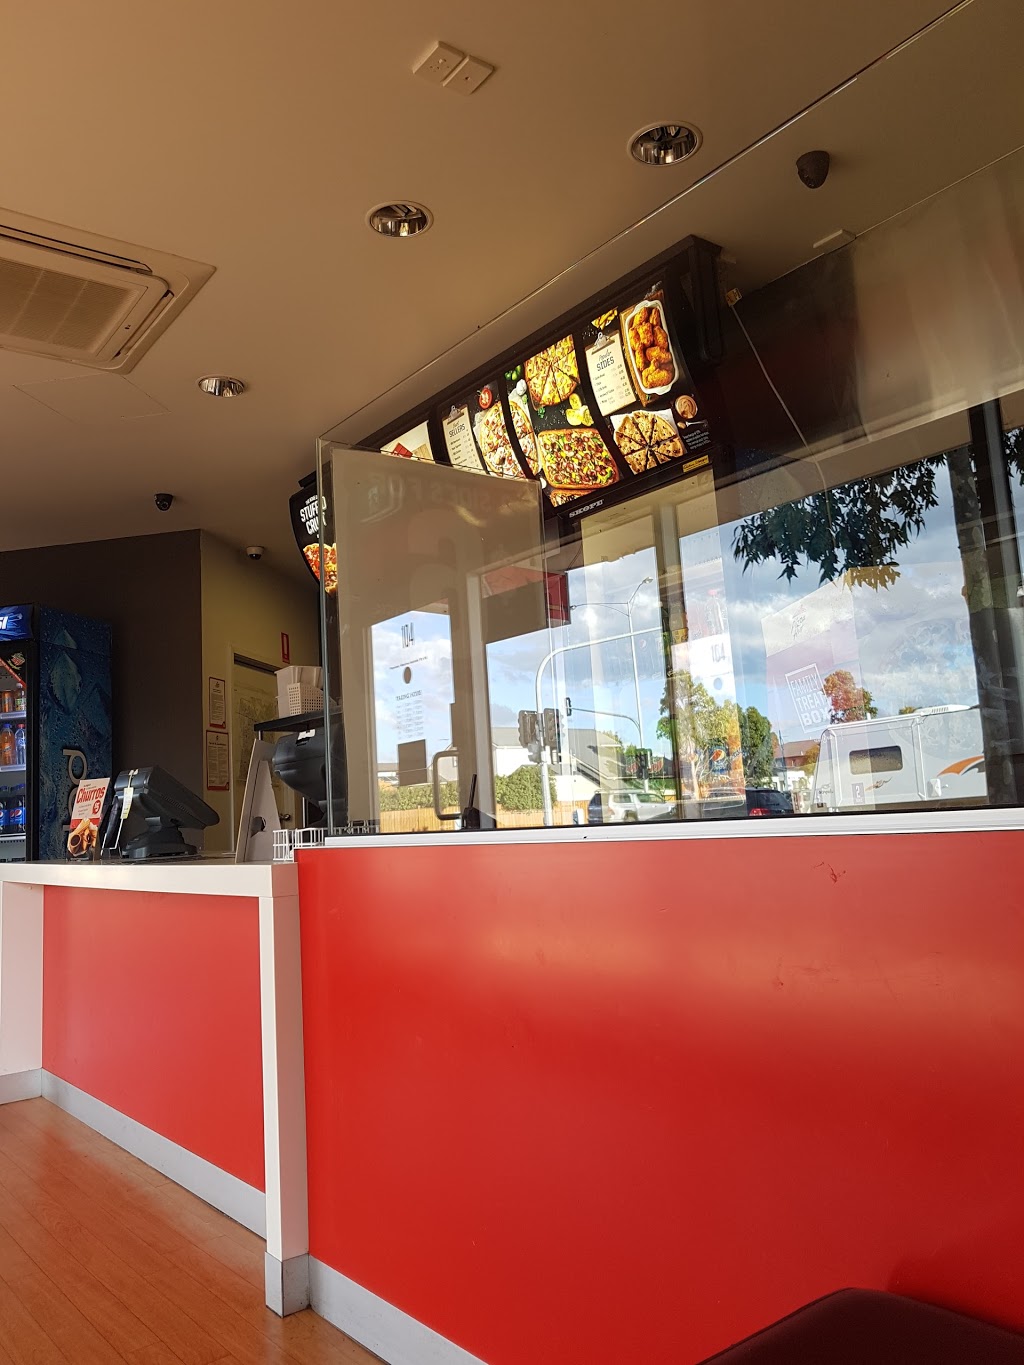 Pizza Hut Caroline Springs | meal delivery | Shop 13 North, Lake Shopping Centre, 106 Gourlay Rd, Melbourne VIC 3023, Australia | 131166 OR +61 131166